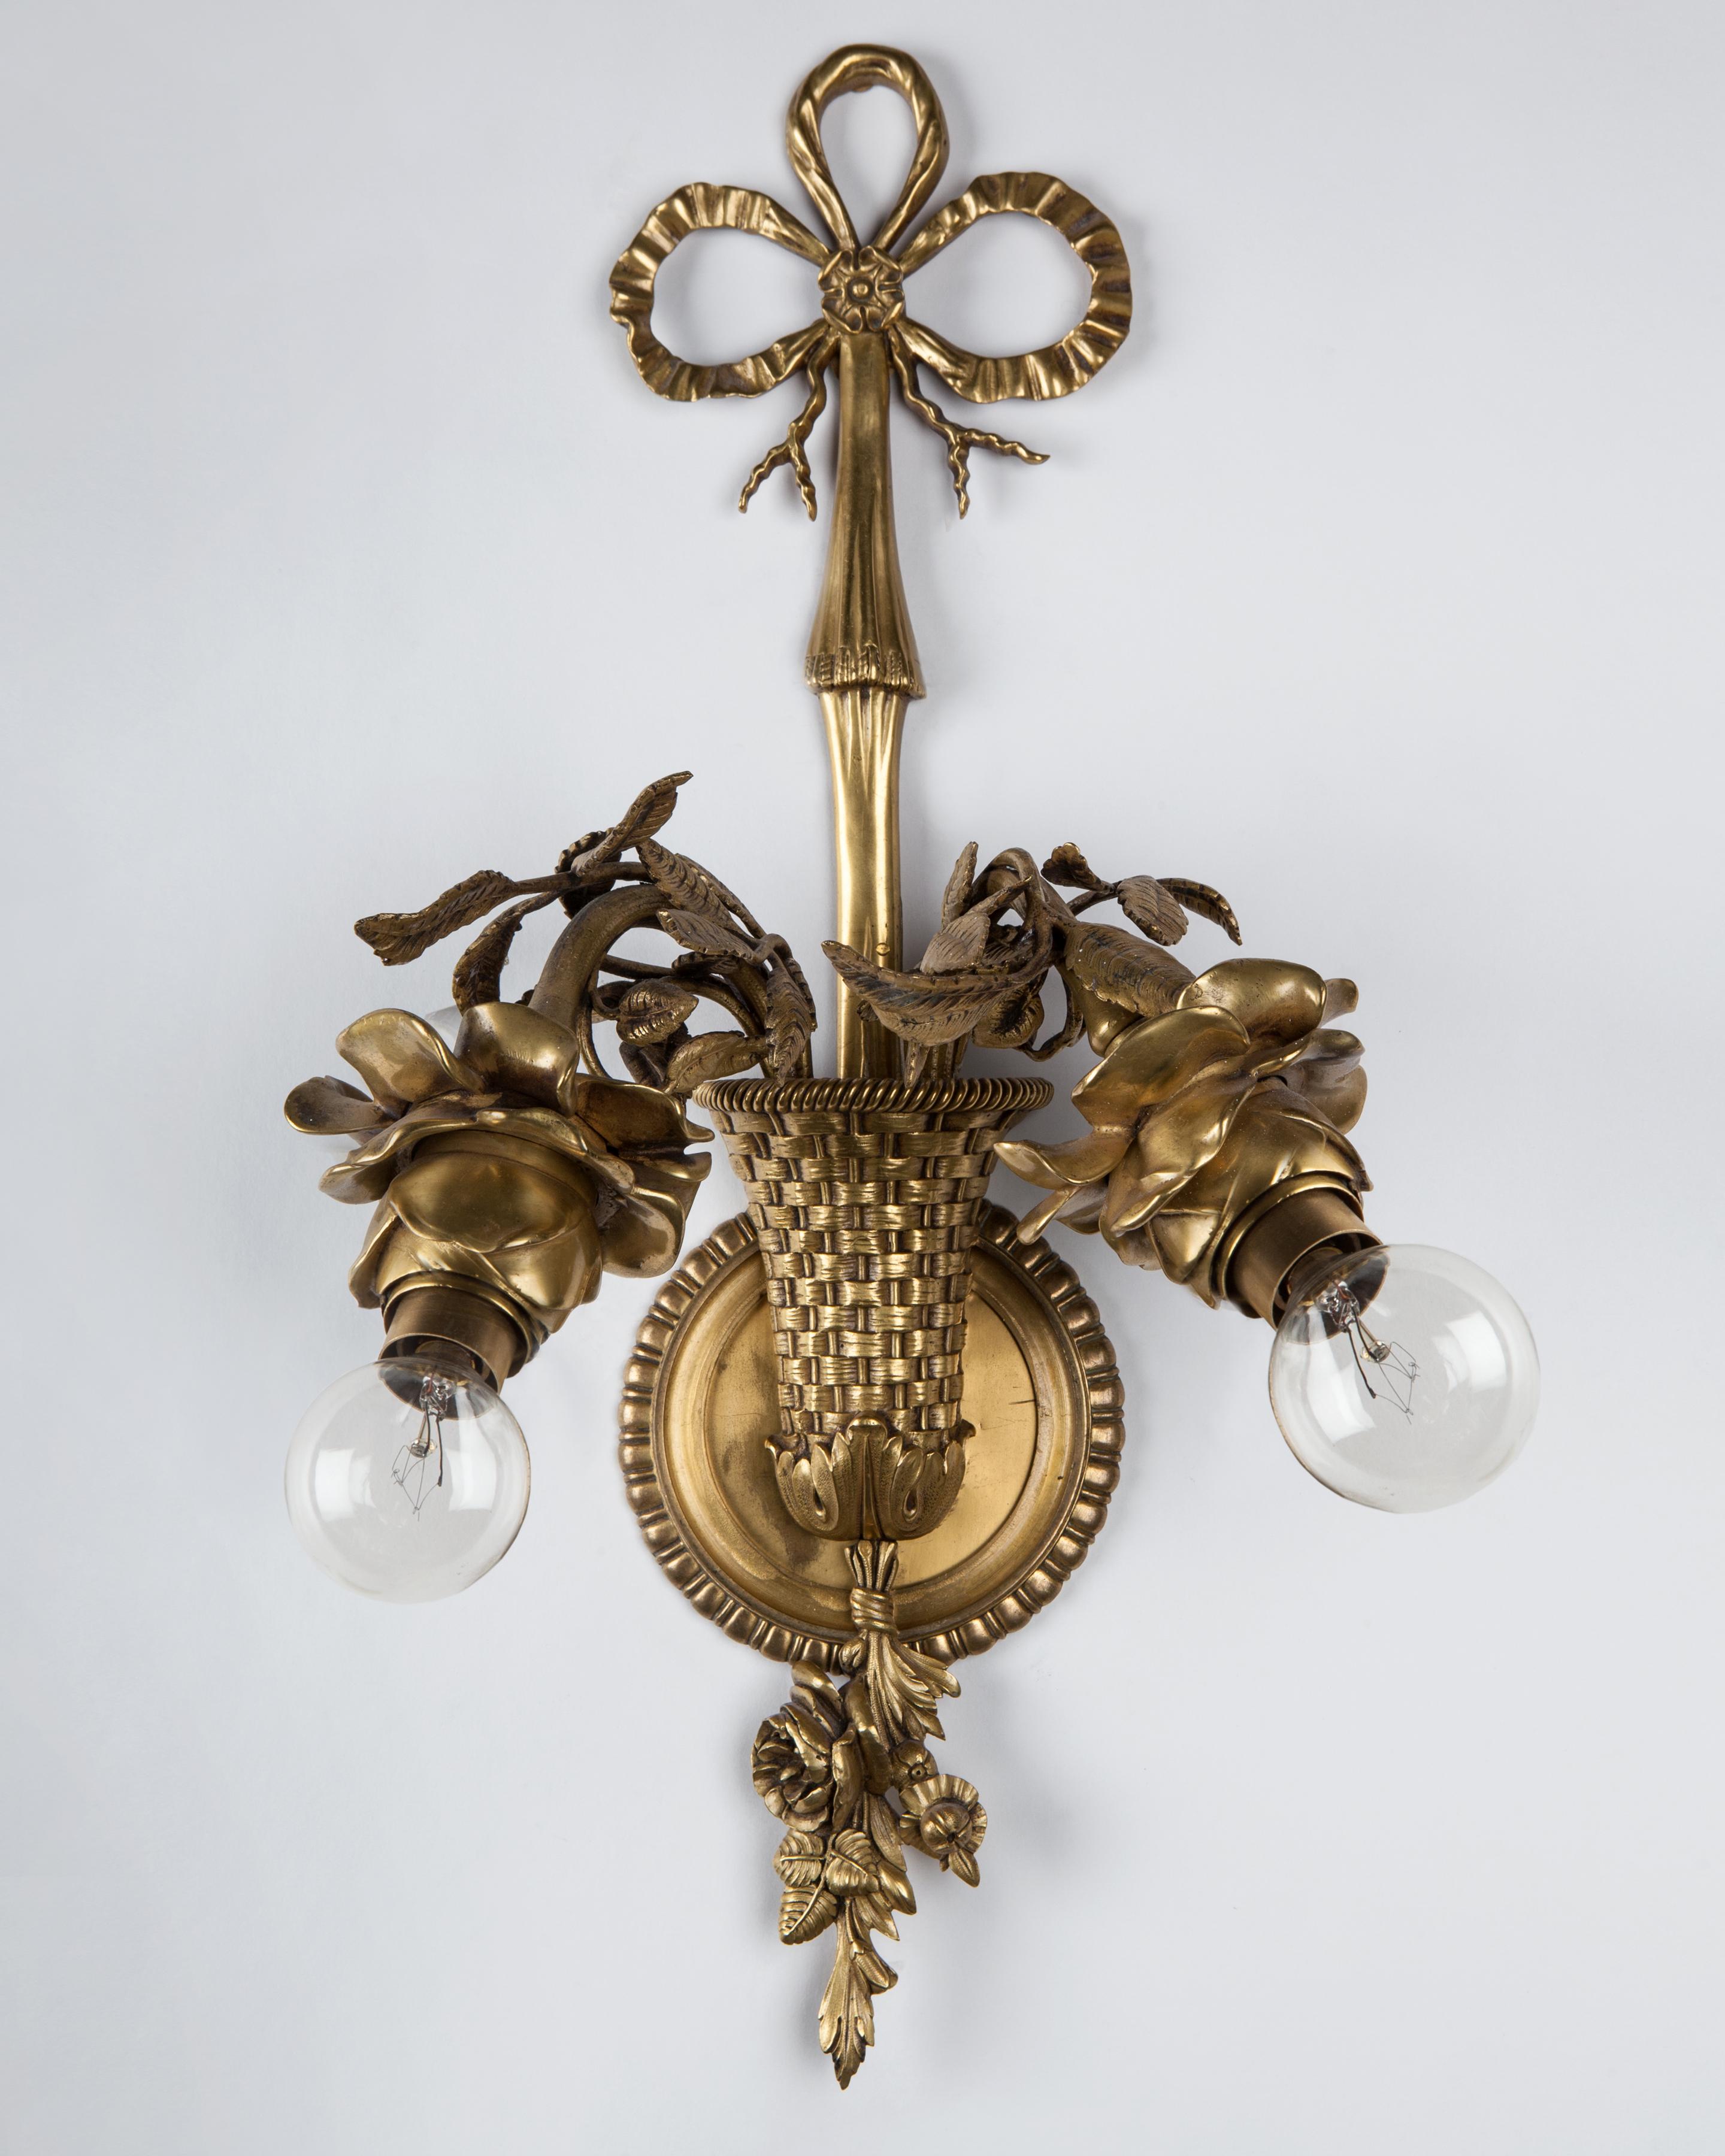 AIS3040
A pair of antique sconces with intricately detailed blooming rose socket cups springing from woven baskets. Having cast bronze gadrooned backplates with bow finials and foliate tassels. In their original aged gilded finish. Attributed to the